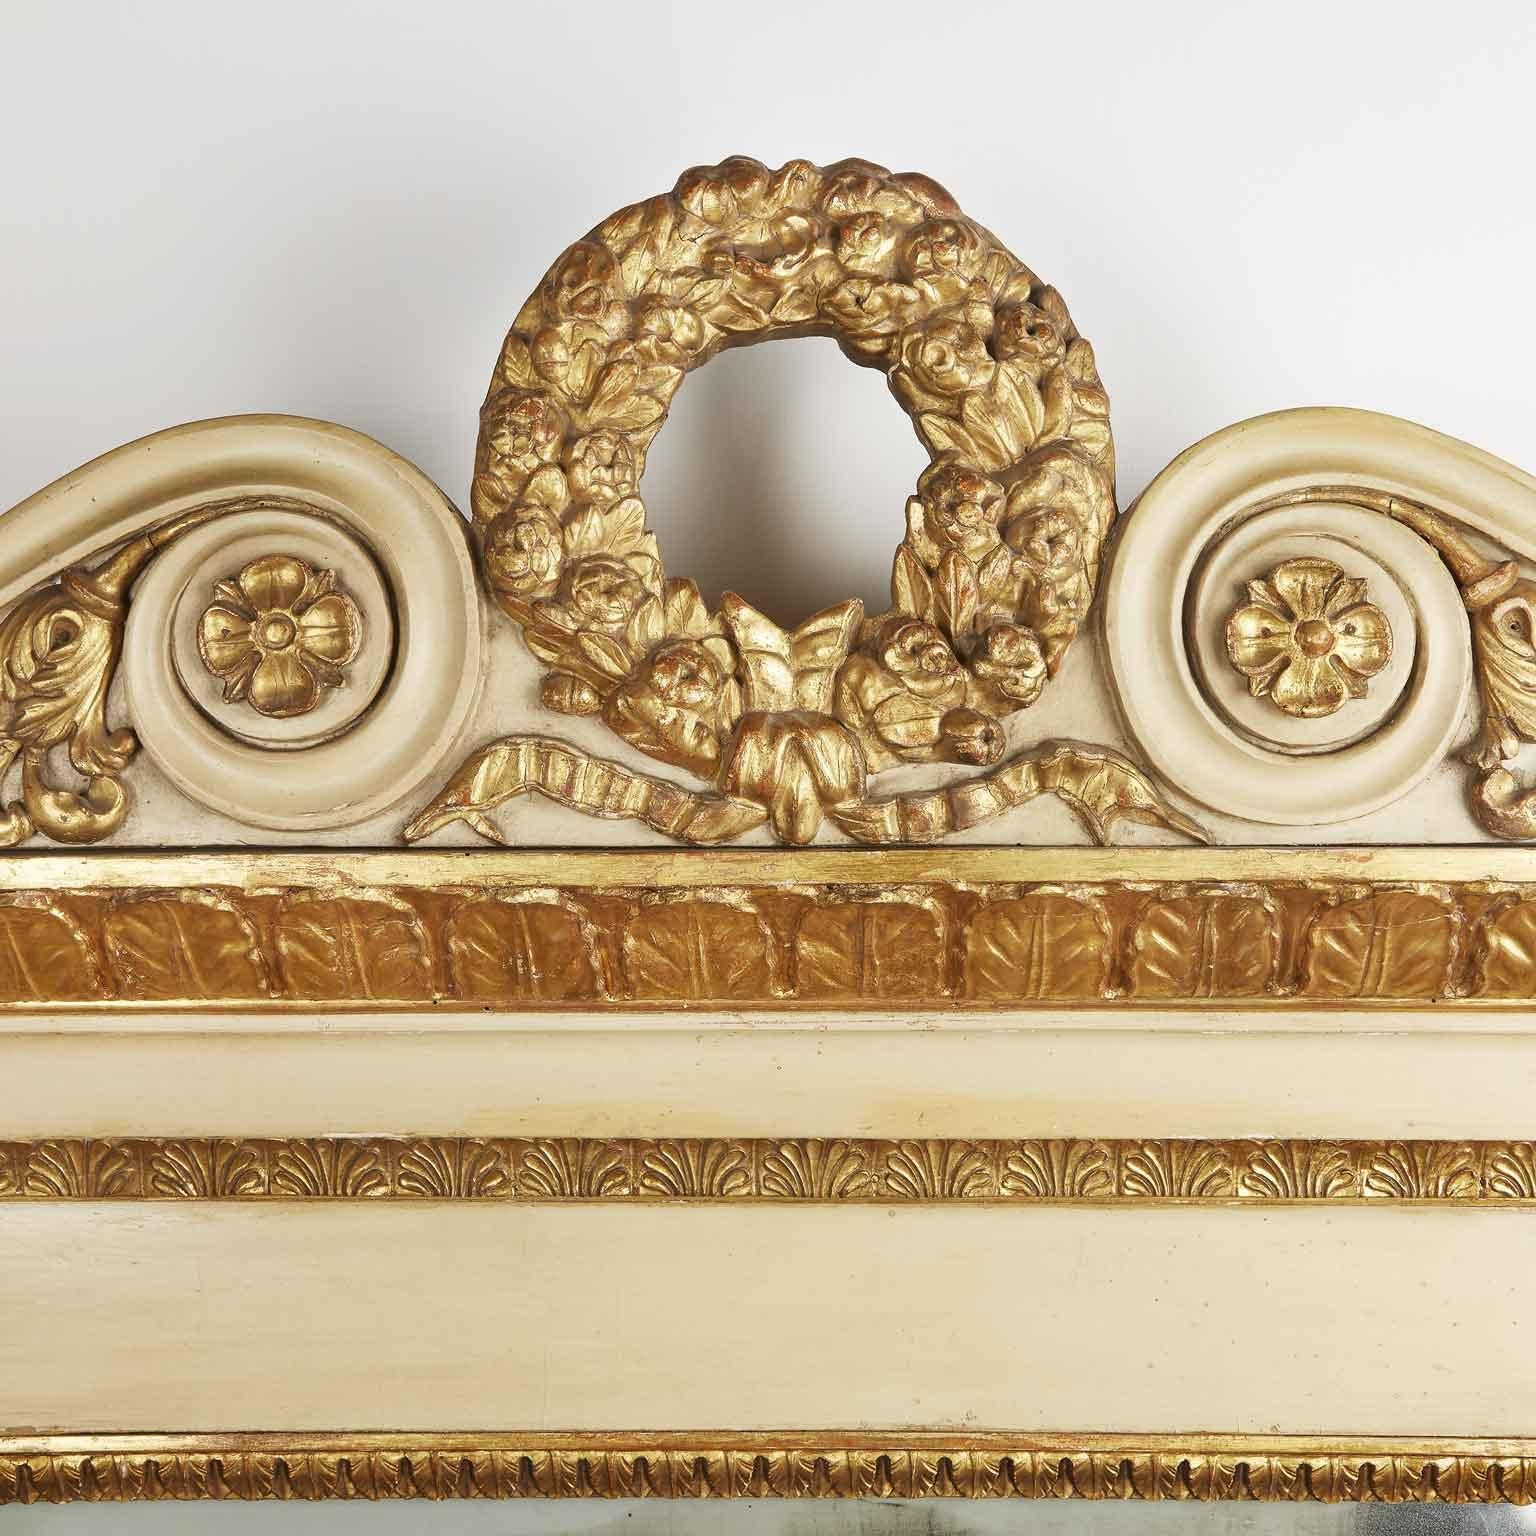 Italian antique ivory color painted and giltwood fireplace mirror, dating back to the mid-19th century. This elegant Neoclassical overmantel mirror is decorated with carved giltwood floral and scrolling ornament, centered by a circular garland. The